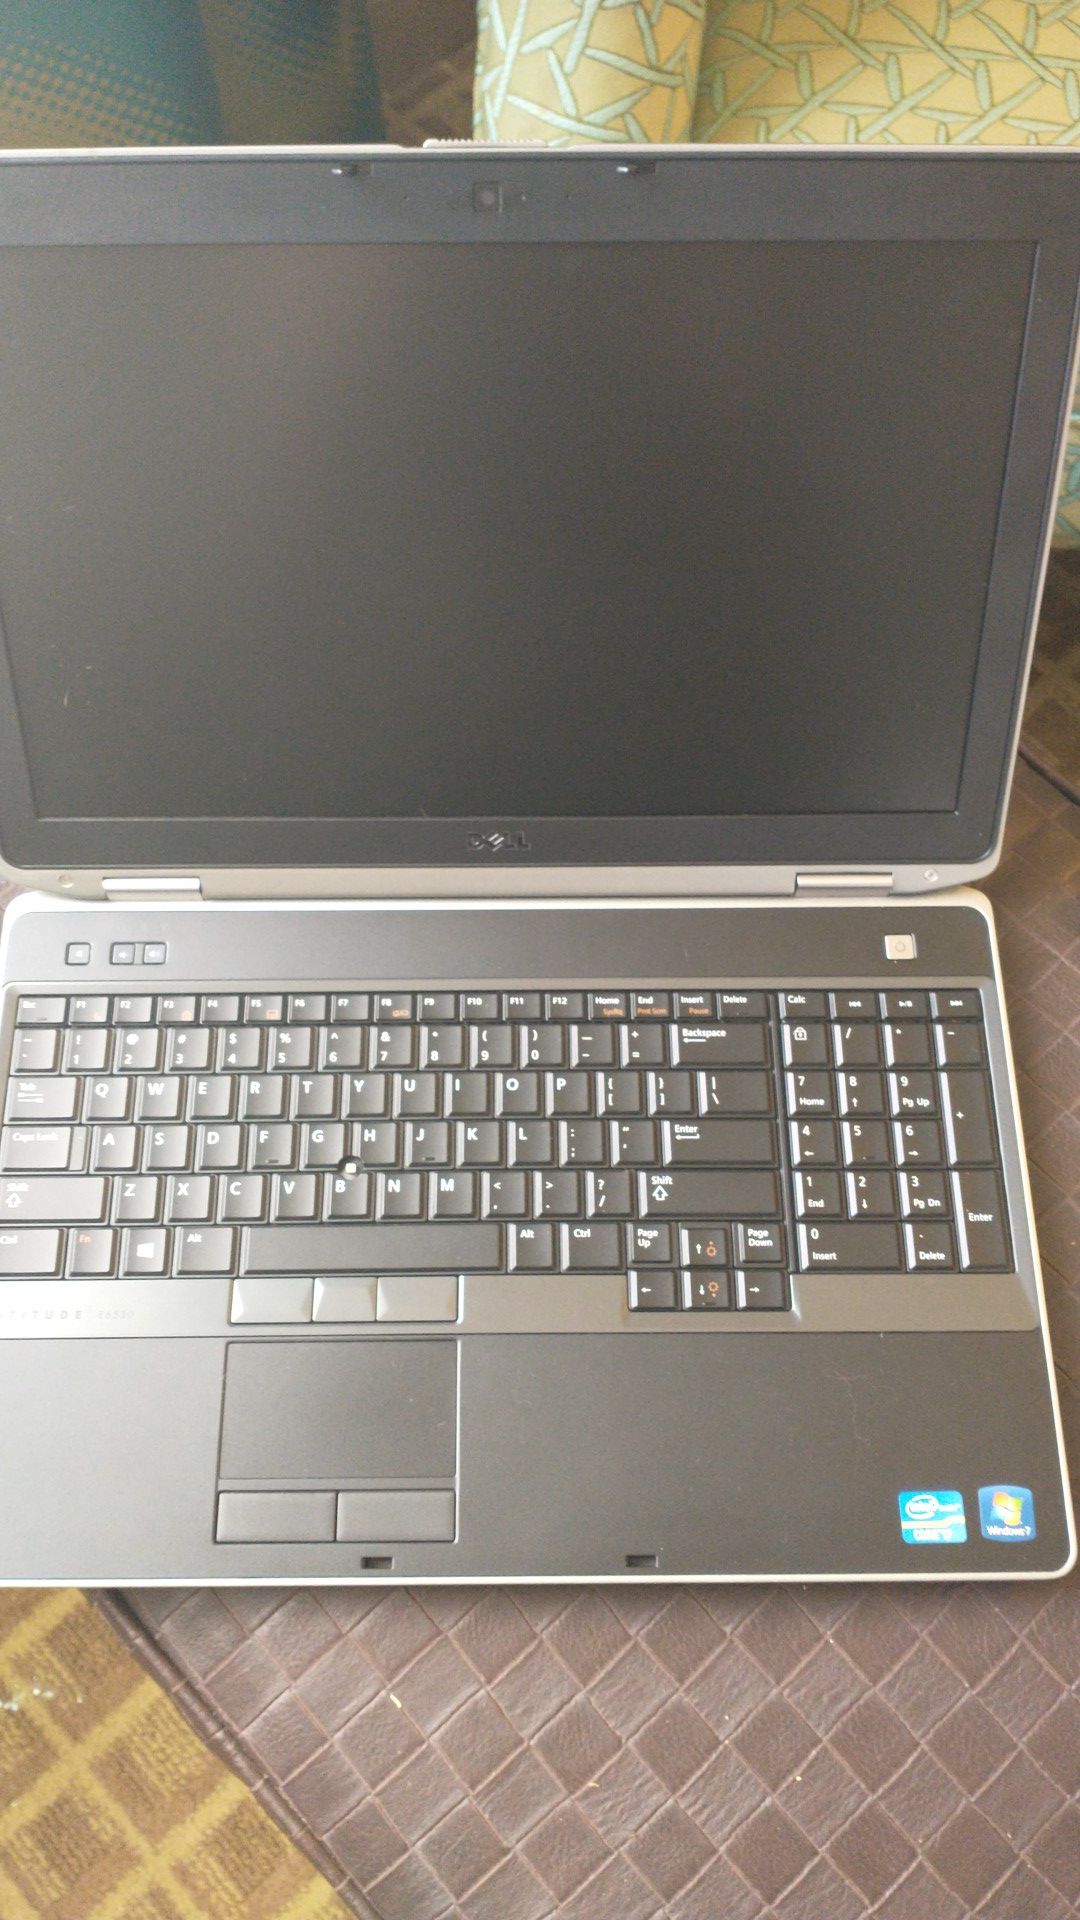 Dell latitude e6530 and presario cq60 ( no charger doesn't power on)